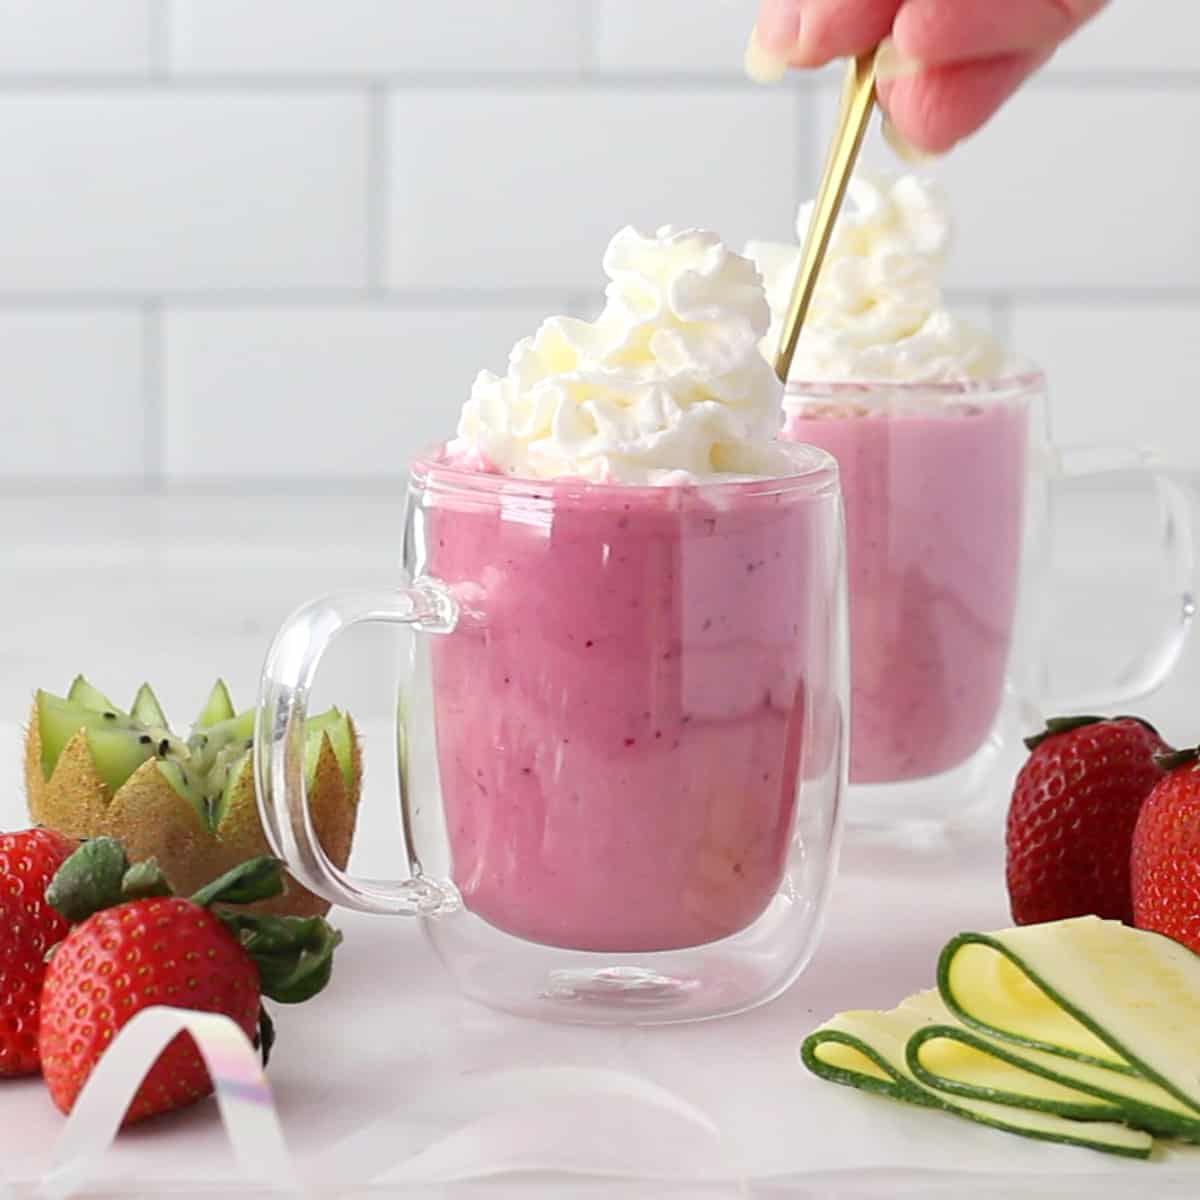 mug with strawberry smoothie with whipped cream